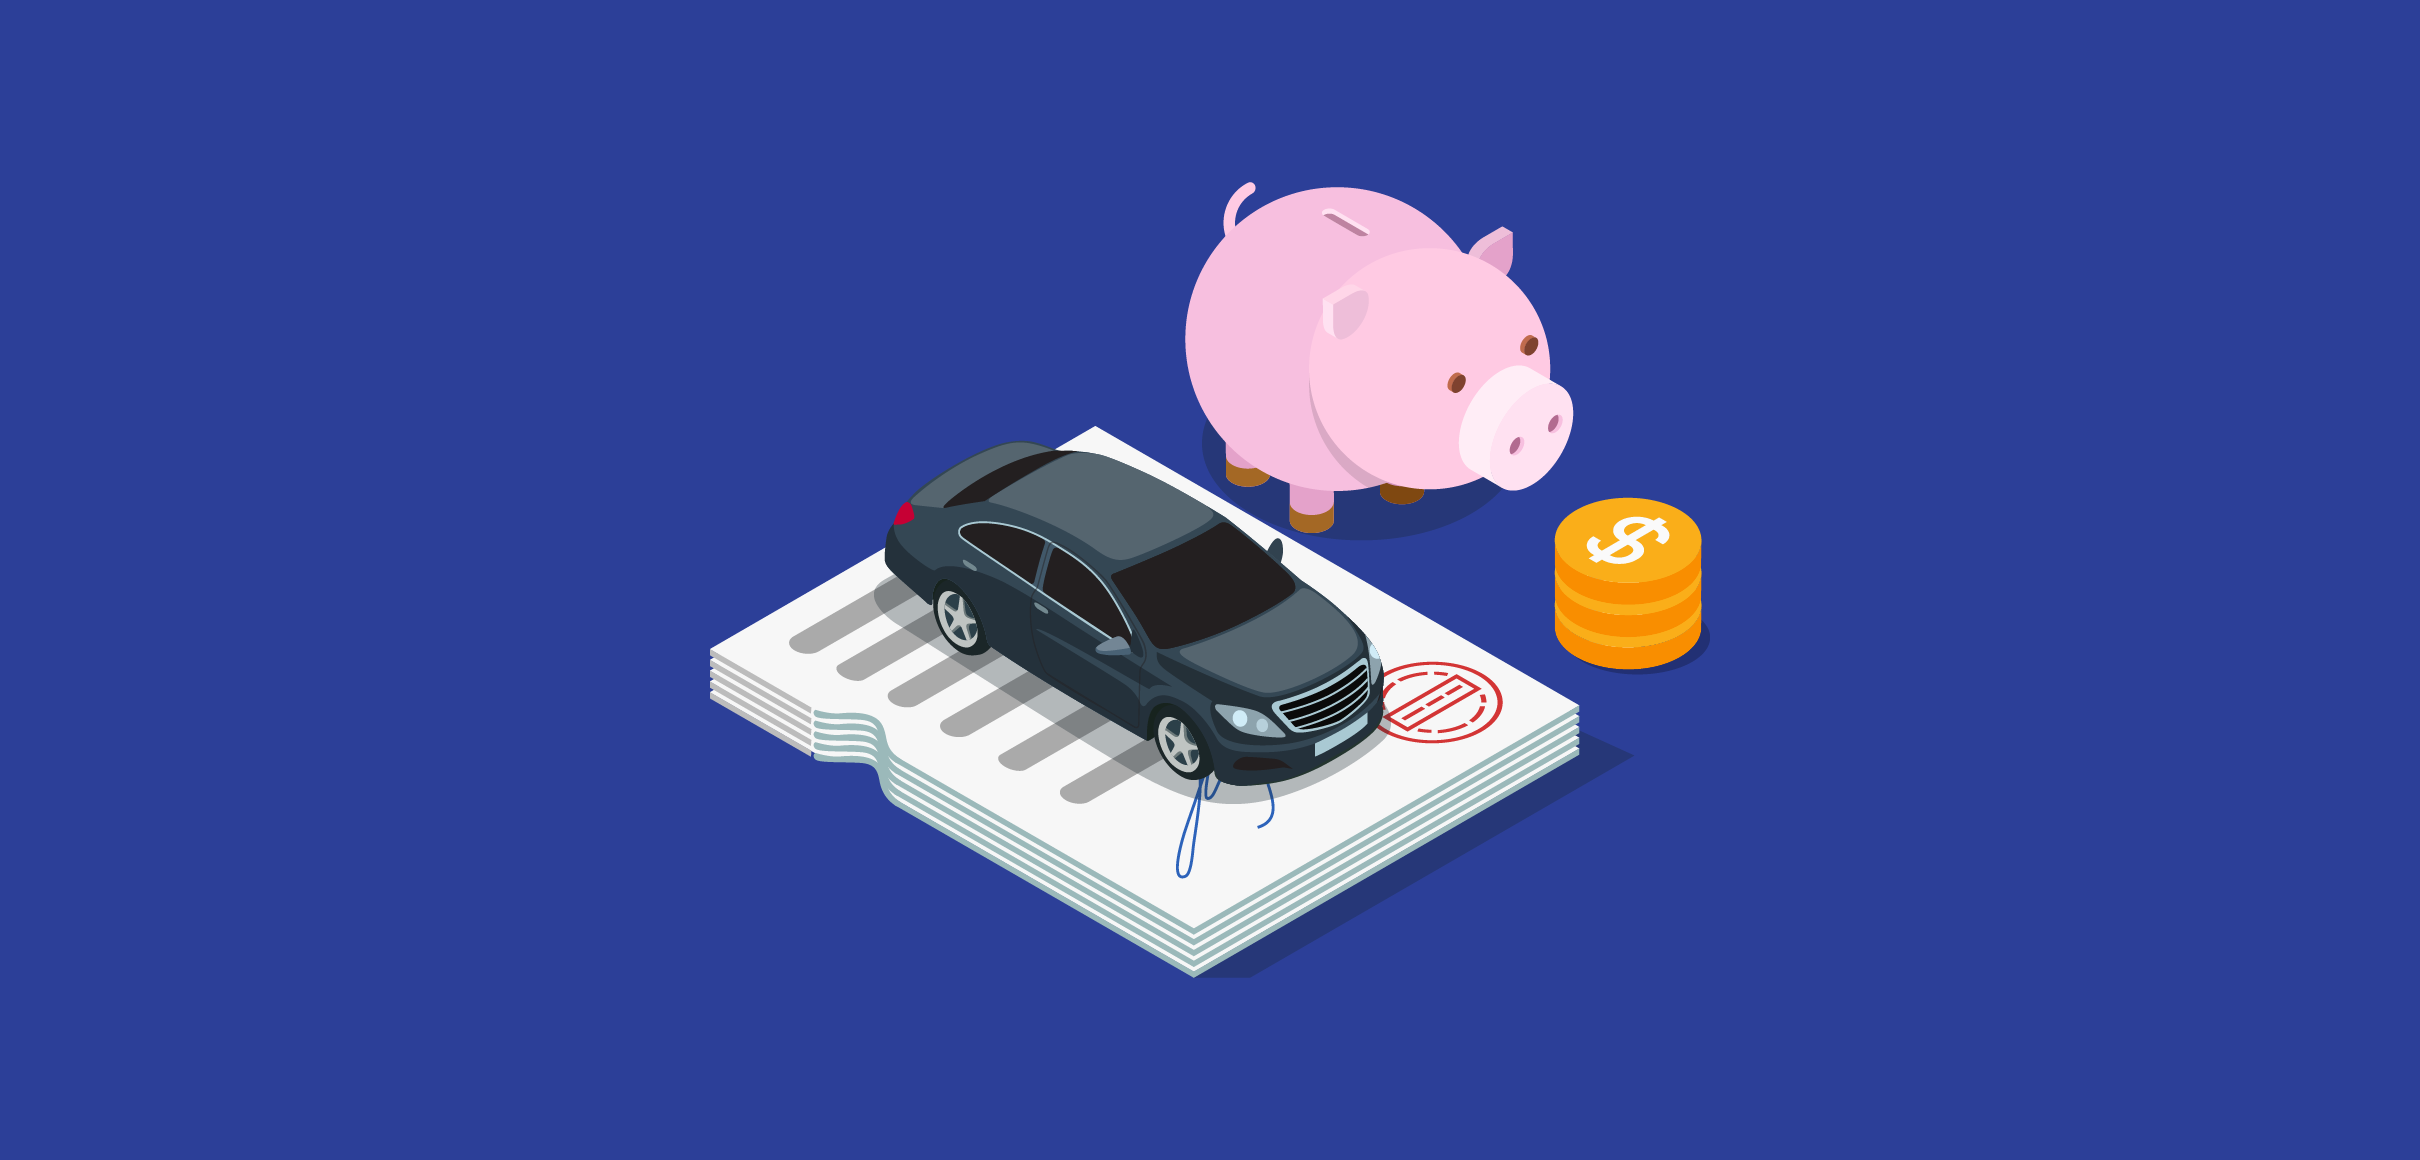 Weighing the pros and cons of refinancing with black car and piggy bank